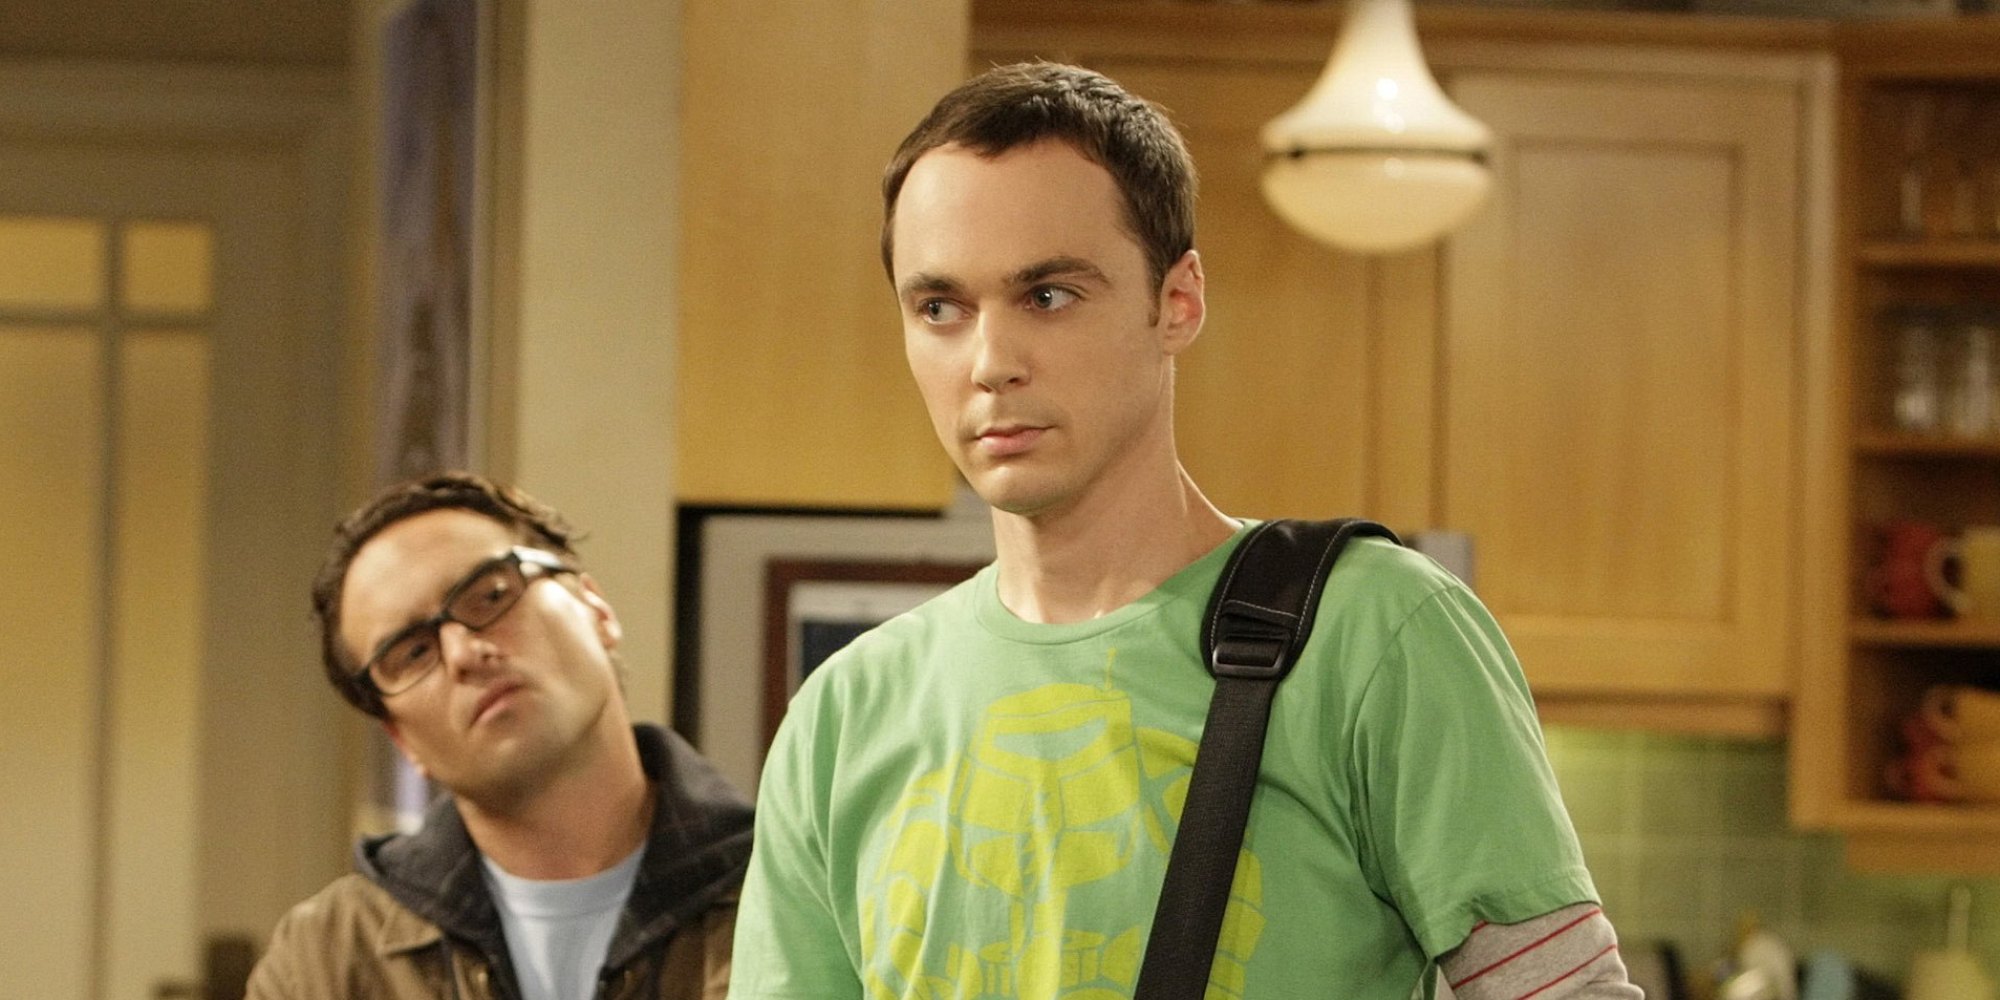 LOS ANGELES - AUGUST 19: "The Bad Fish Paradigm" - After her first date with Leonard (Johnny Galecki, left) goes awry, Penny finds an unwilling confidant in Leonard's anti-social roommate, Sheldon (Jim Parsons, right), on the second season premiere of THE BIG BANG THEORY, Monday, September 22 (8:00-8:30 PM, ET/PT) on the CBS Television Network. (Sonja Flemming/CBS via Getty Images)